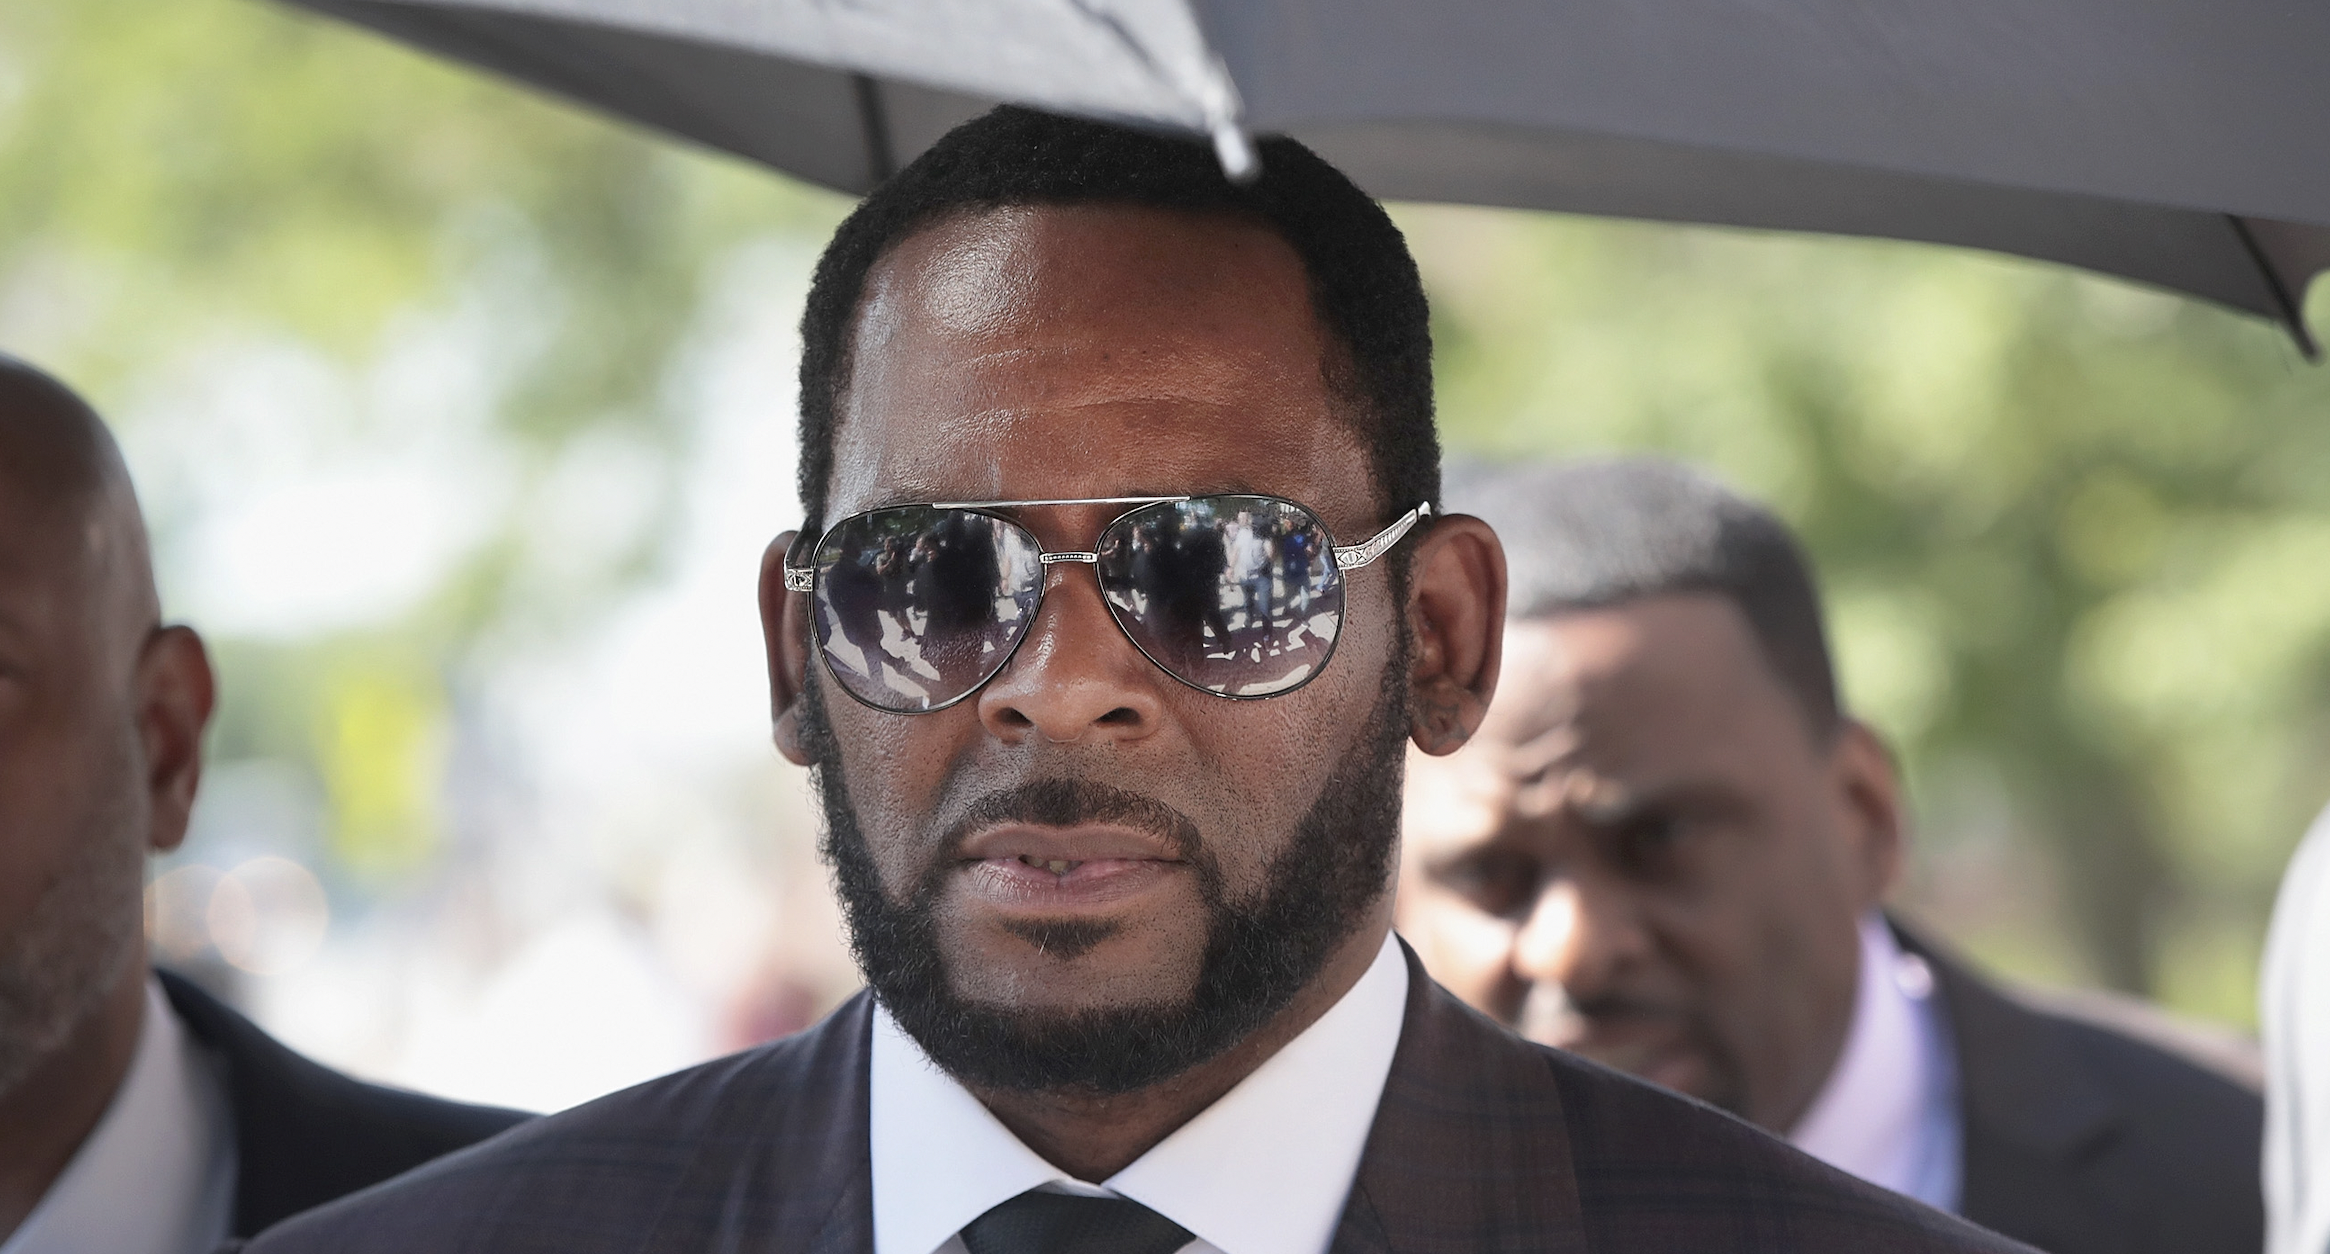 R. Kelly’s Lawyers Claim He’s Unfairly Targeted, Cite Elvis Presley Dating 14-Year-Old Wife